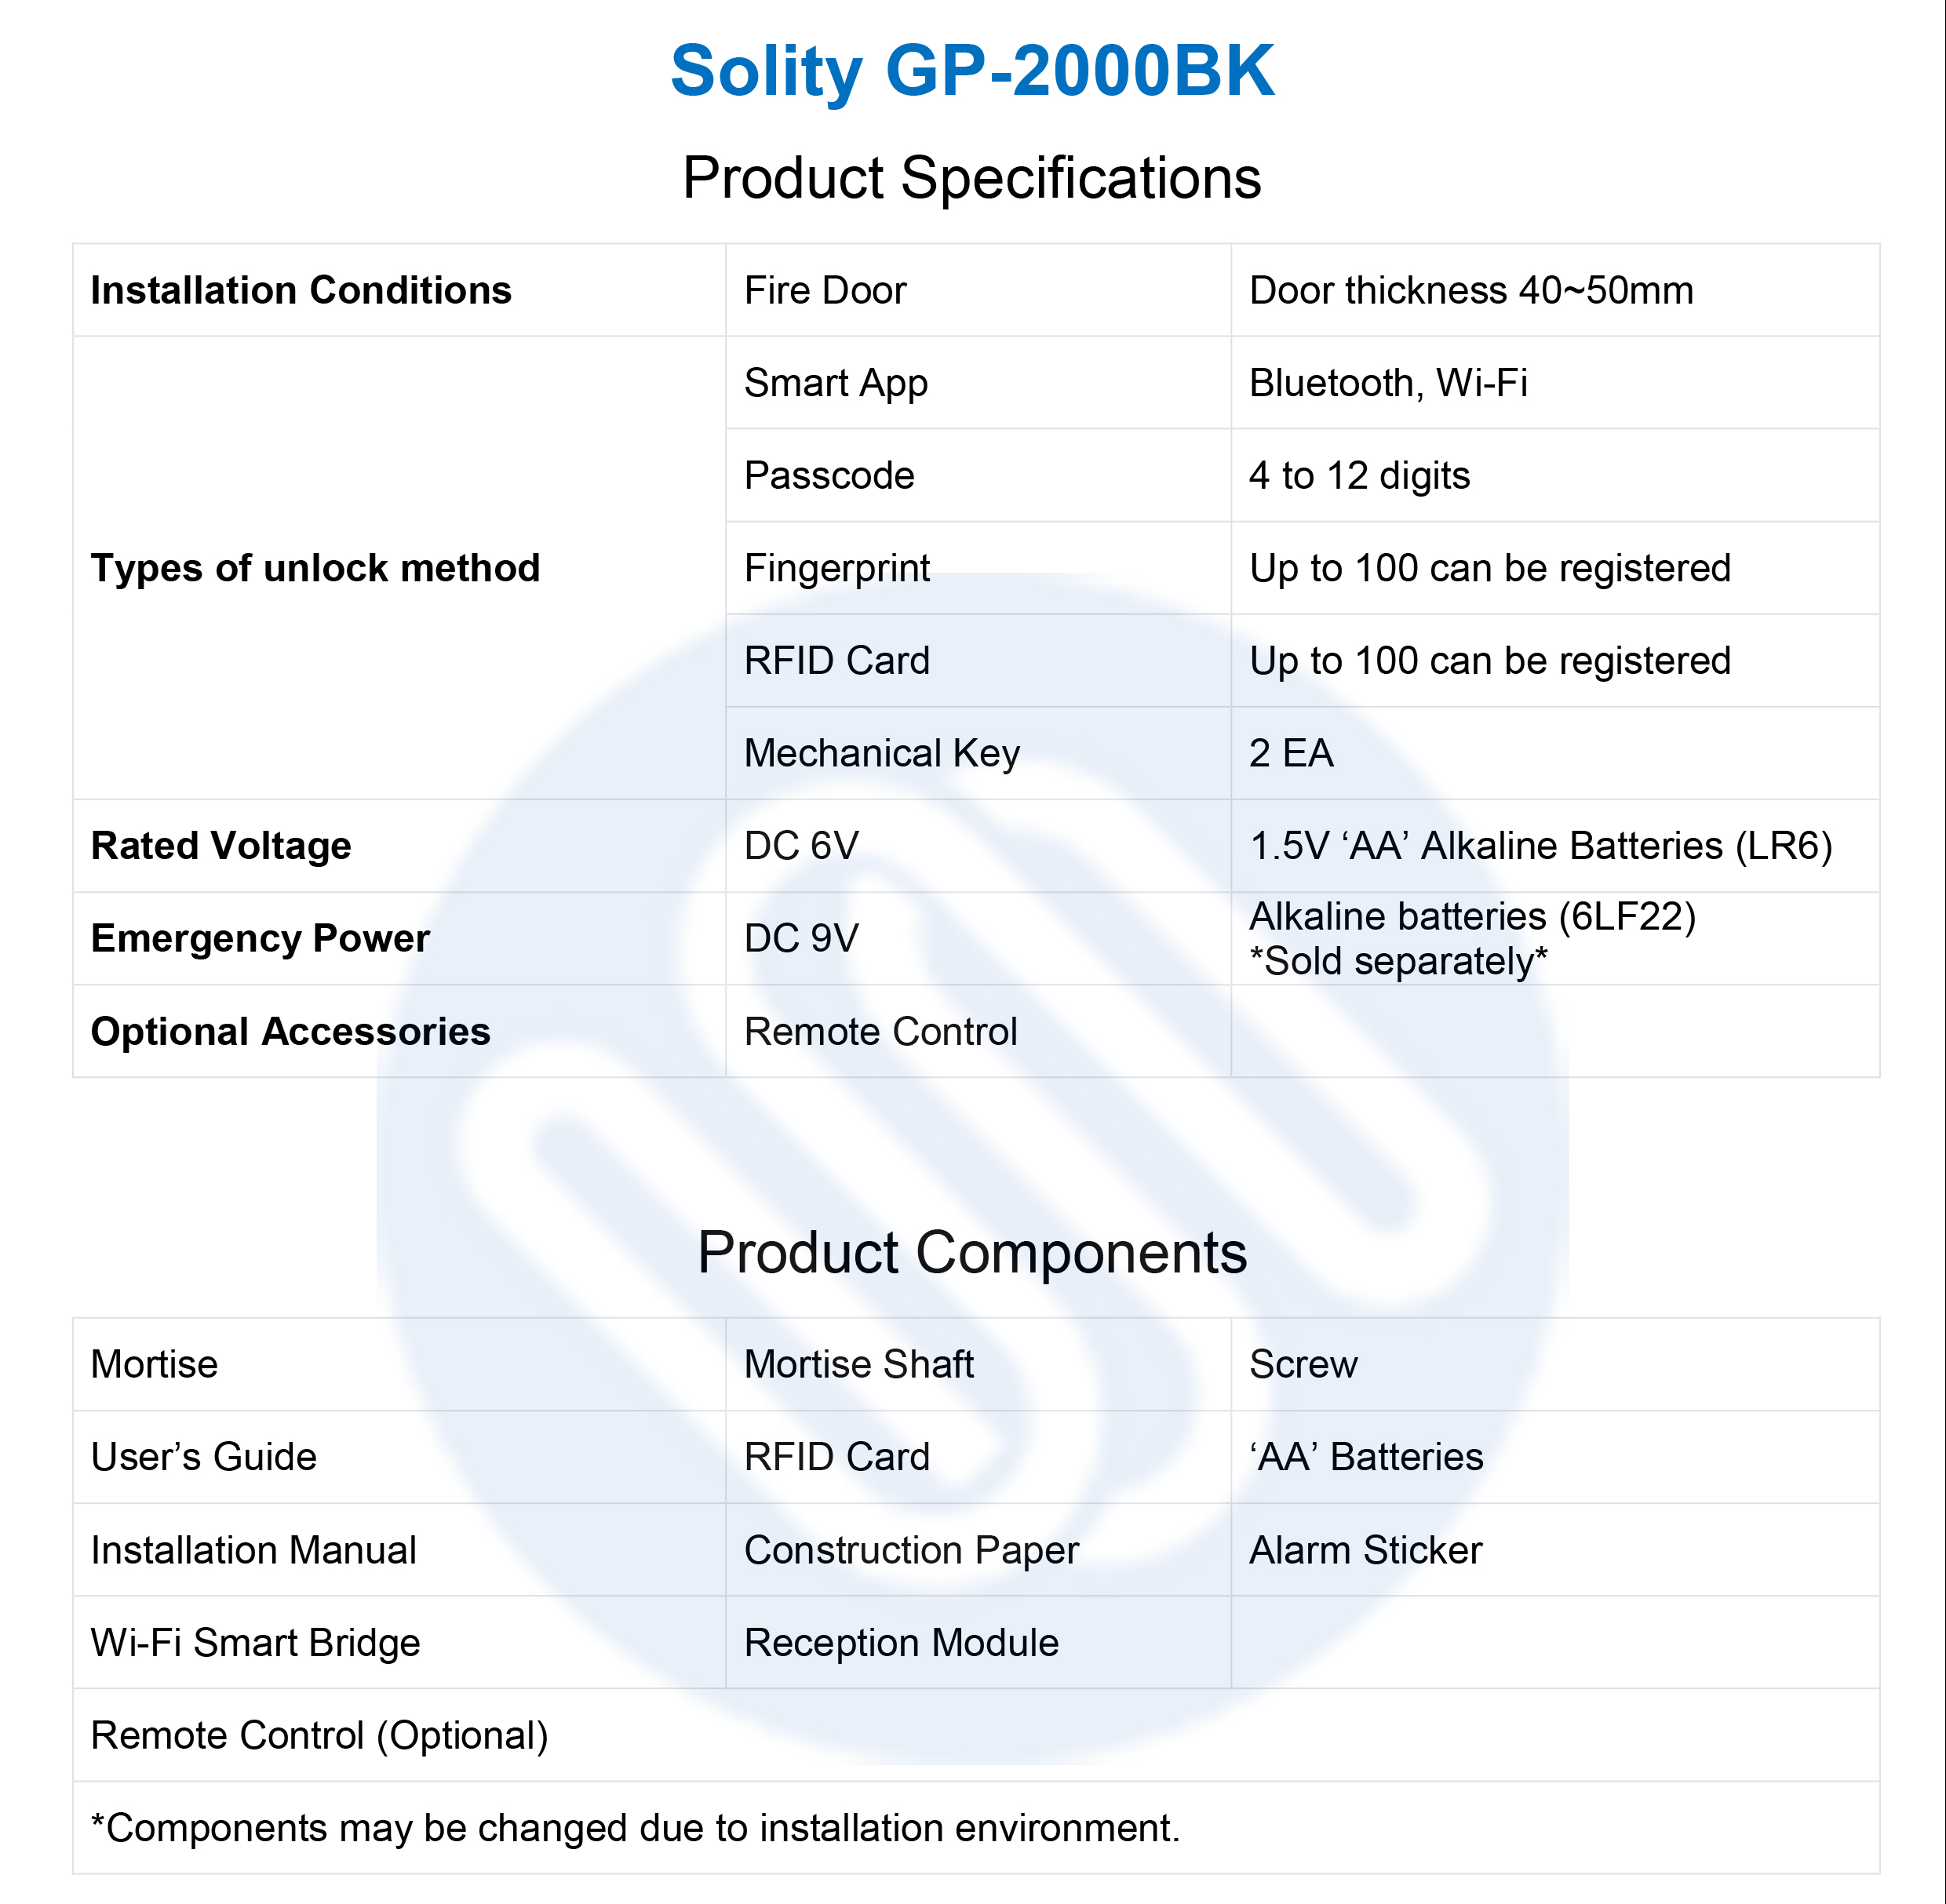 SOLITY GP-2000BK Product Specification